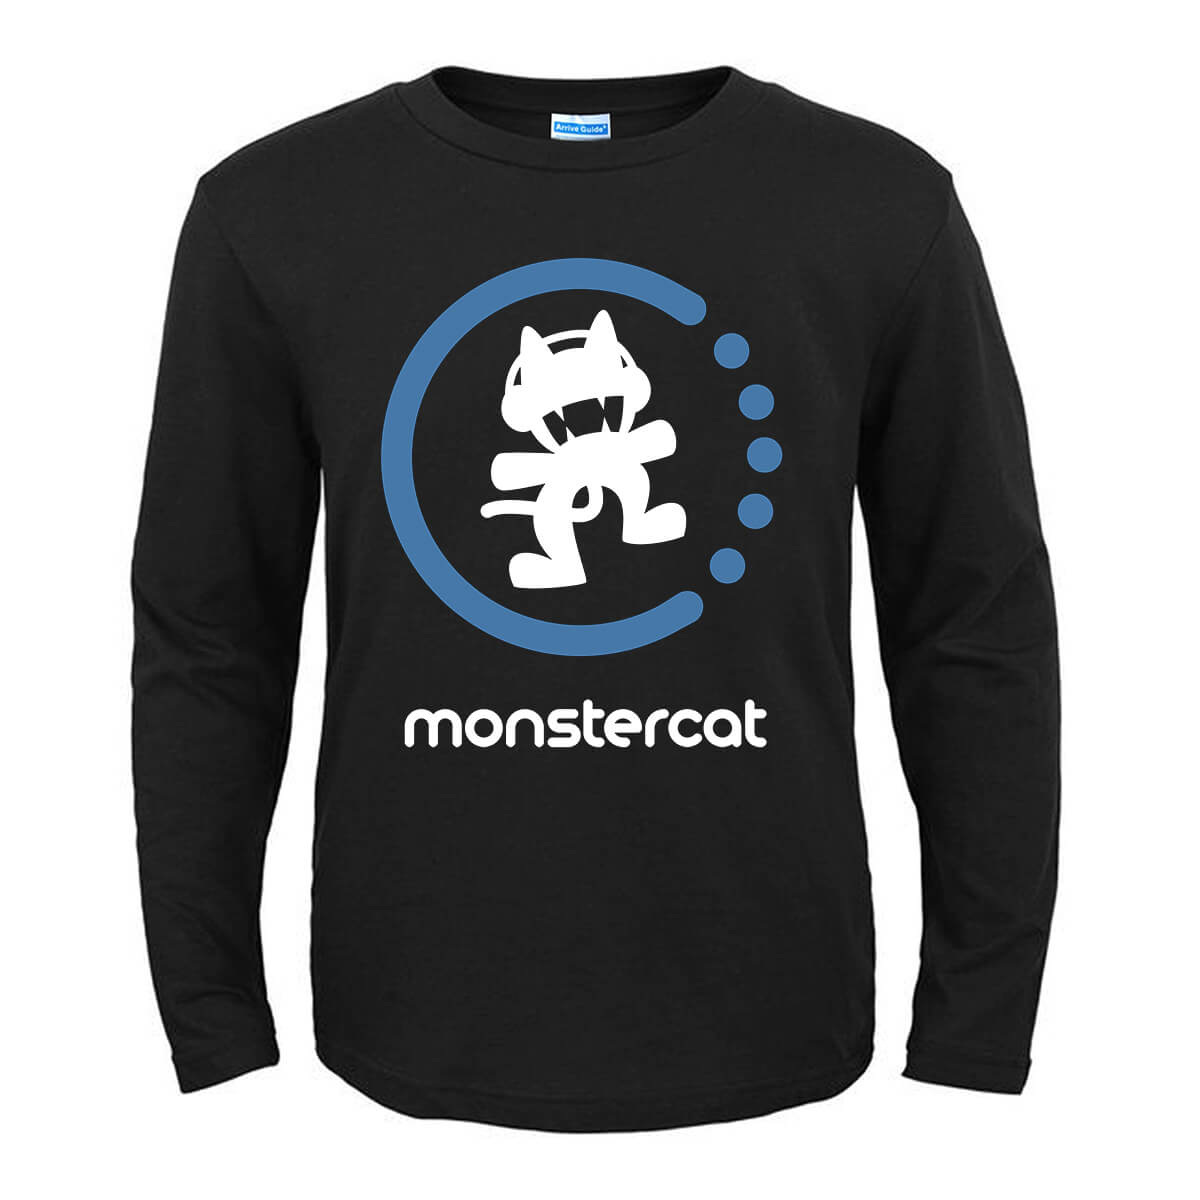 Graphic Tees Awesome Monstercat T-Shirt | WISHINY